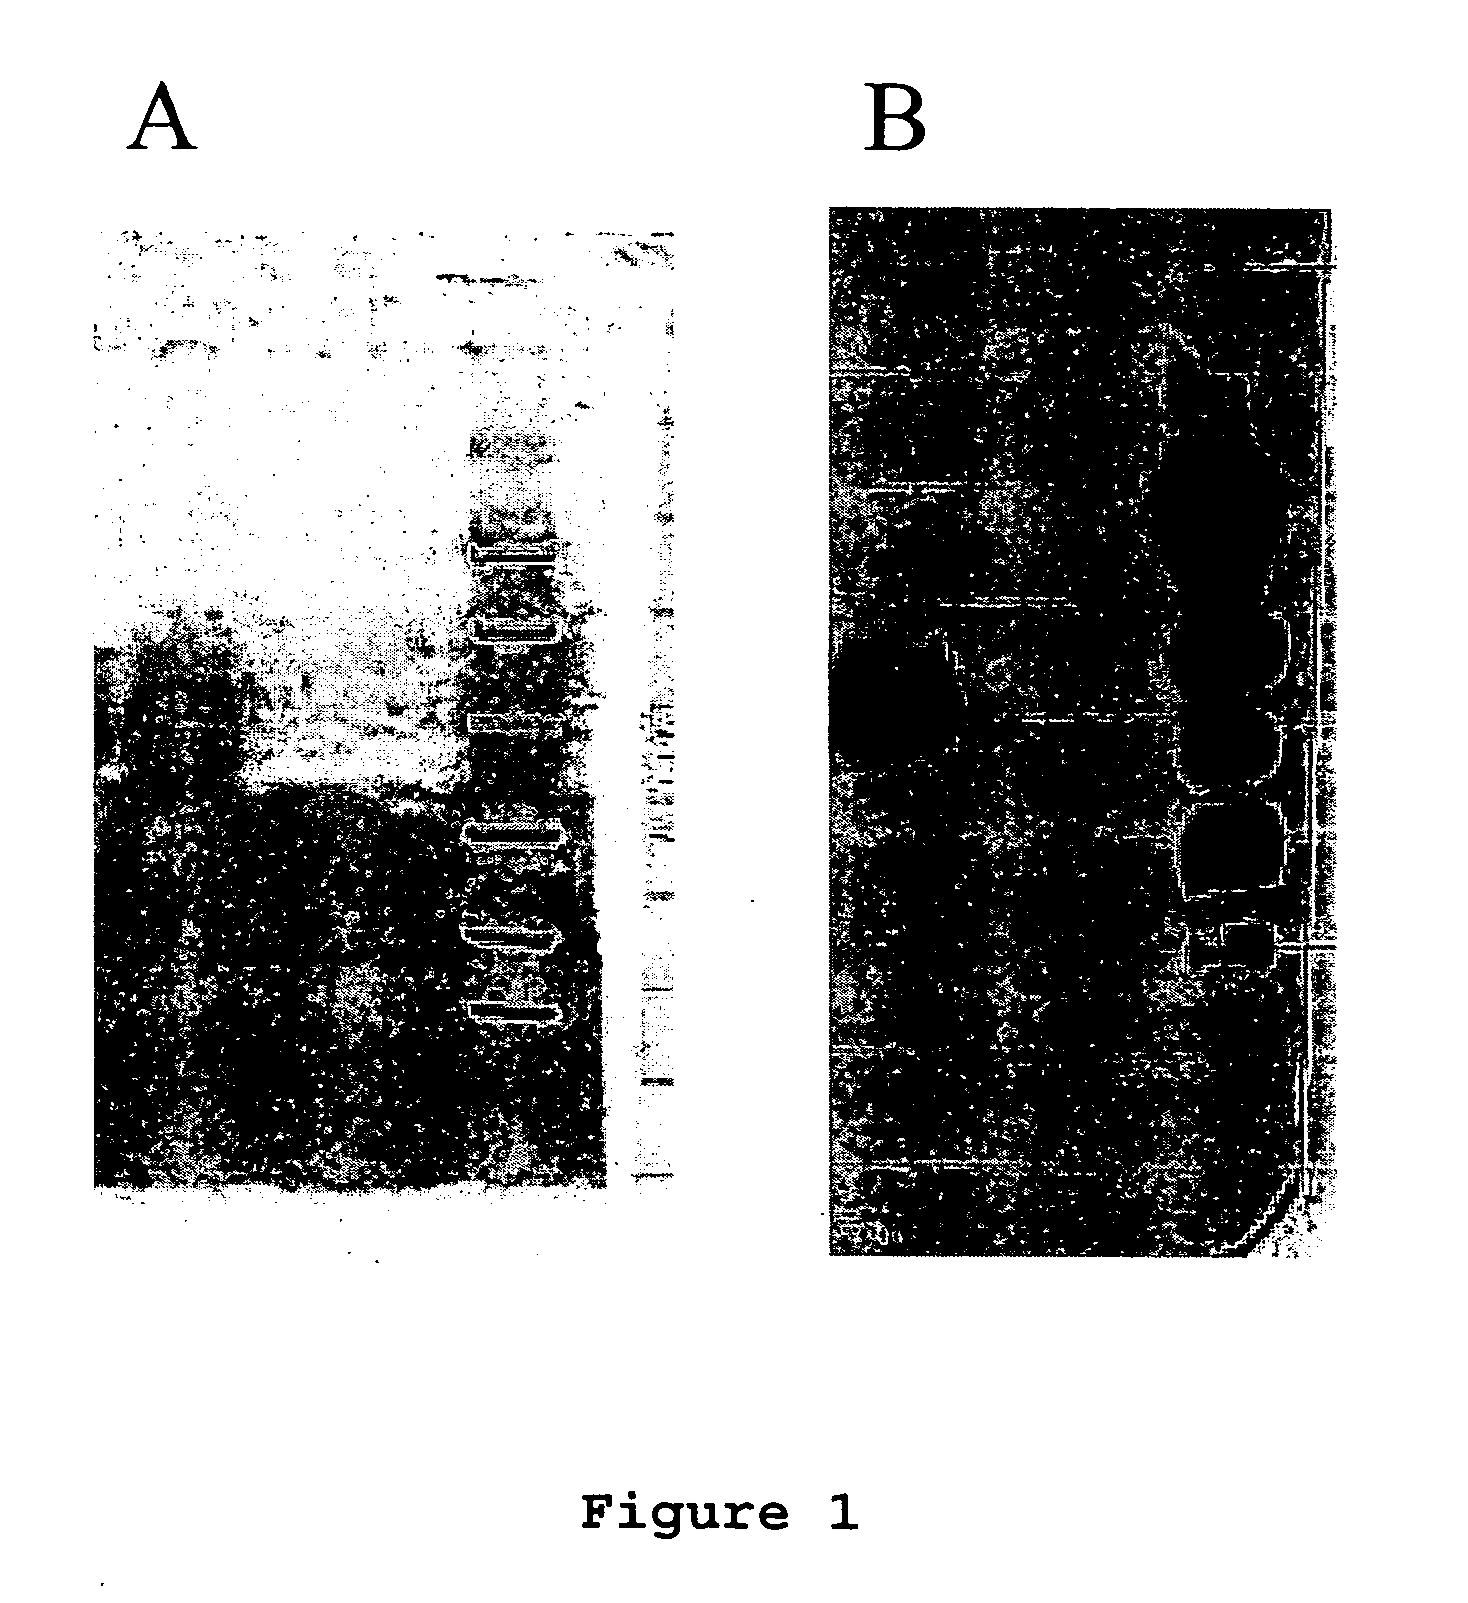 Method for assessing risk of and predisposition to development of a pathology related to the presence of anti-epcr autoantibodies